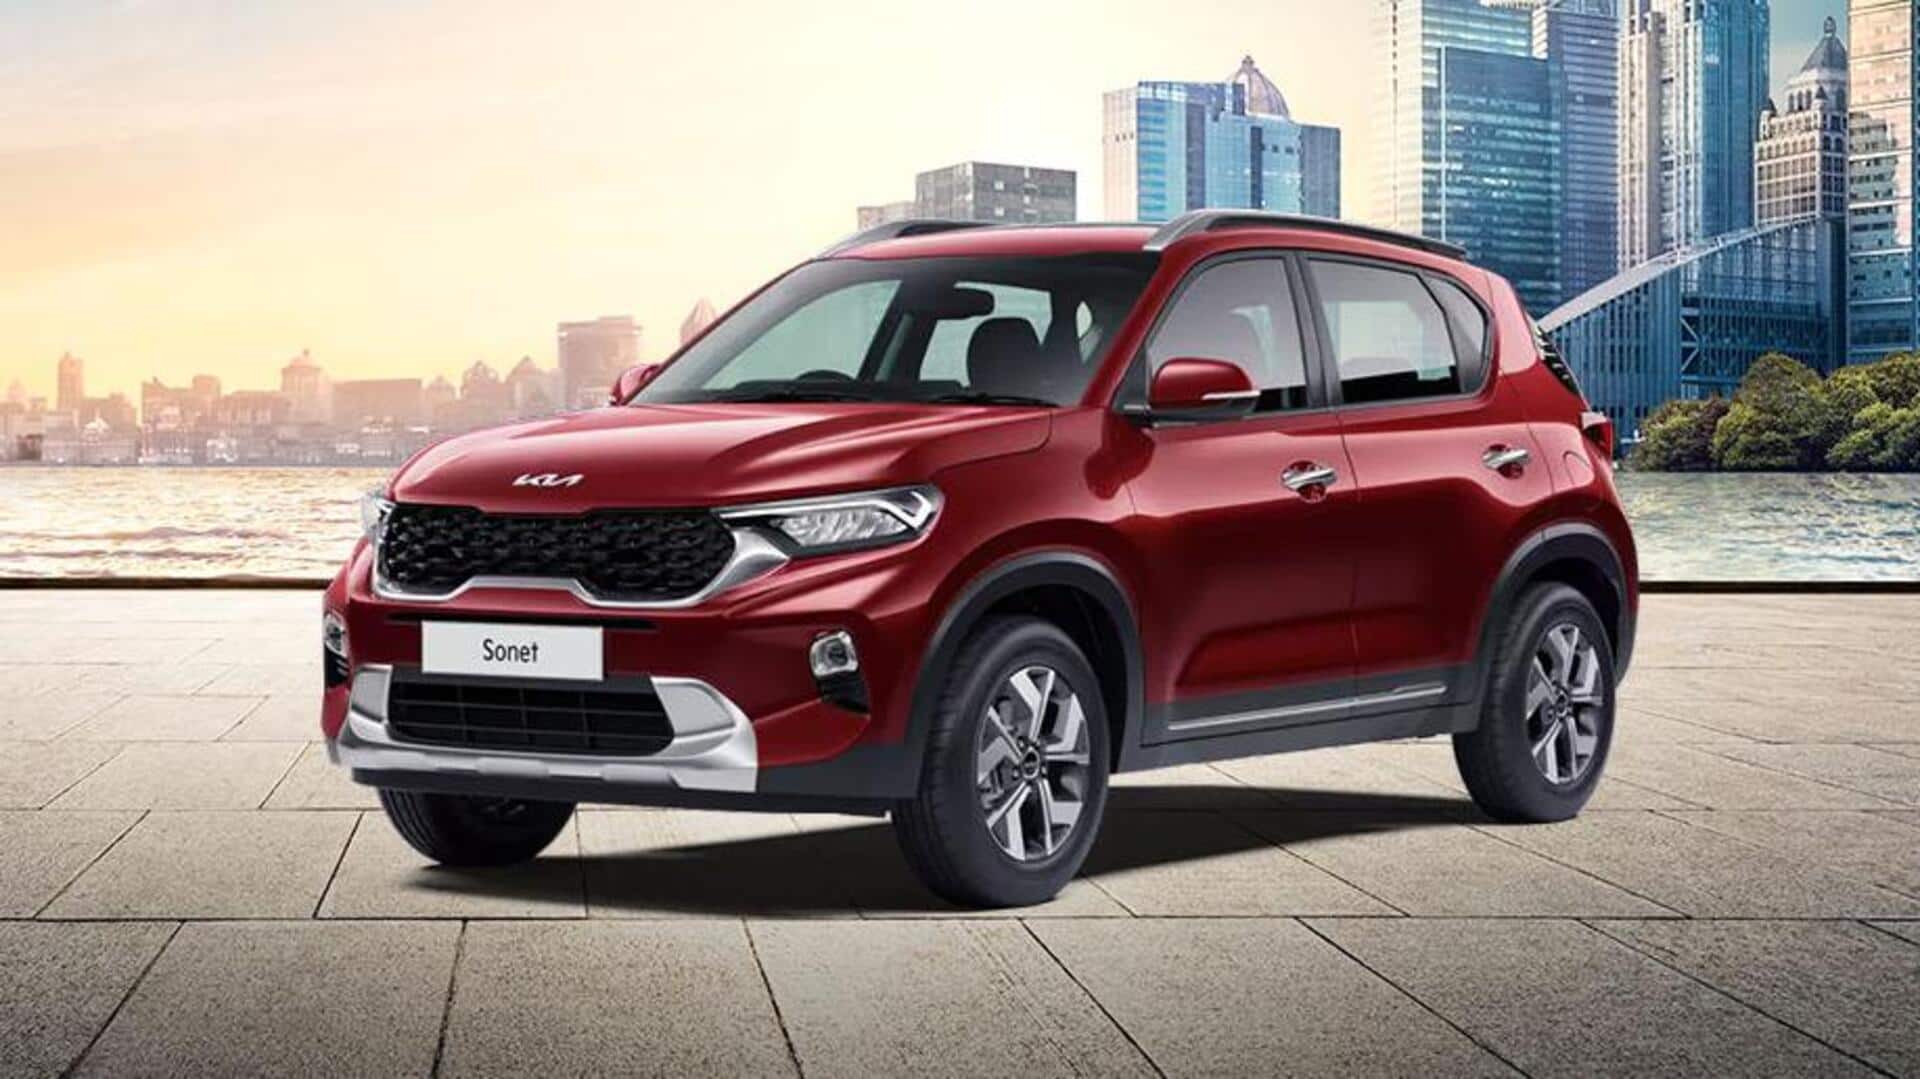 Kia Motors to introduce facelifted Sonet in India this December